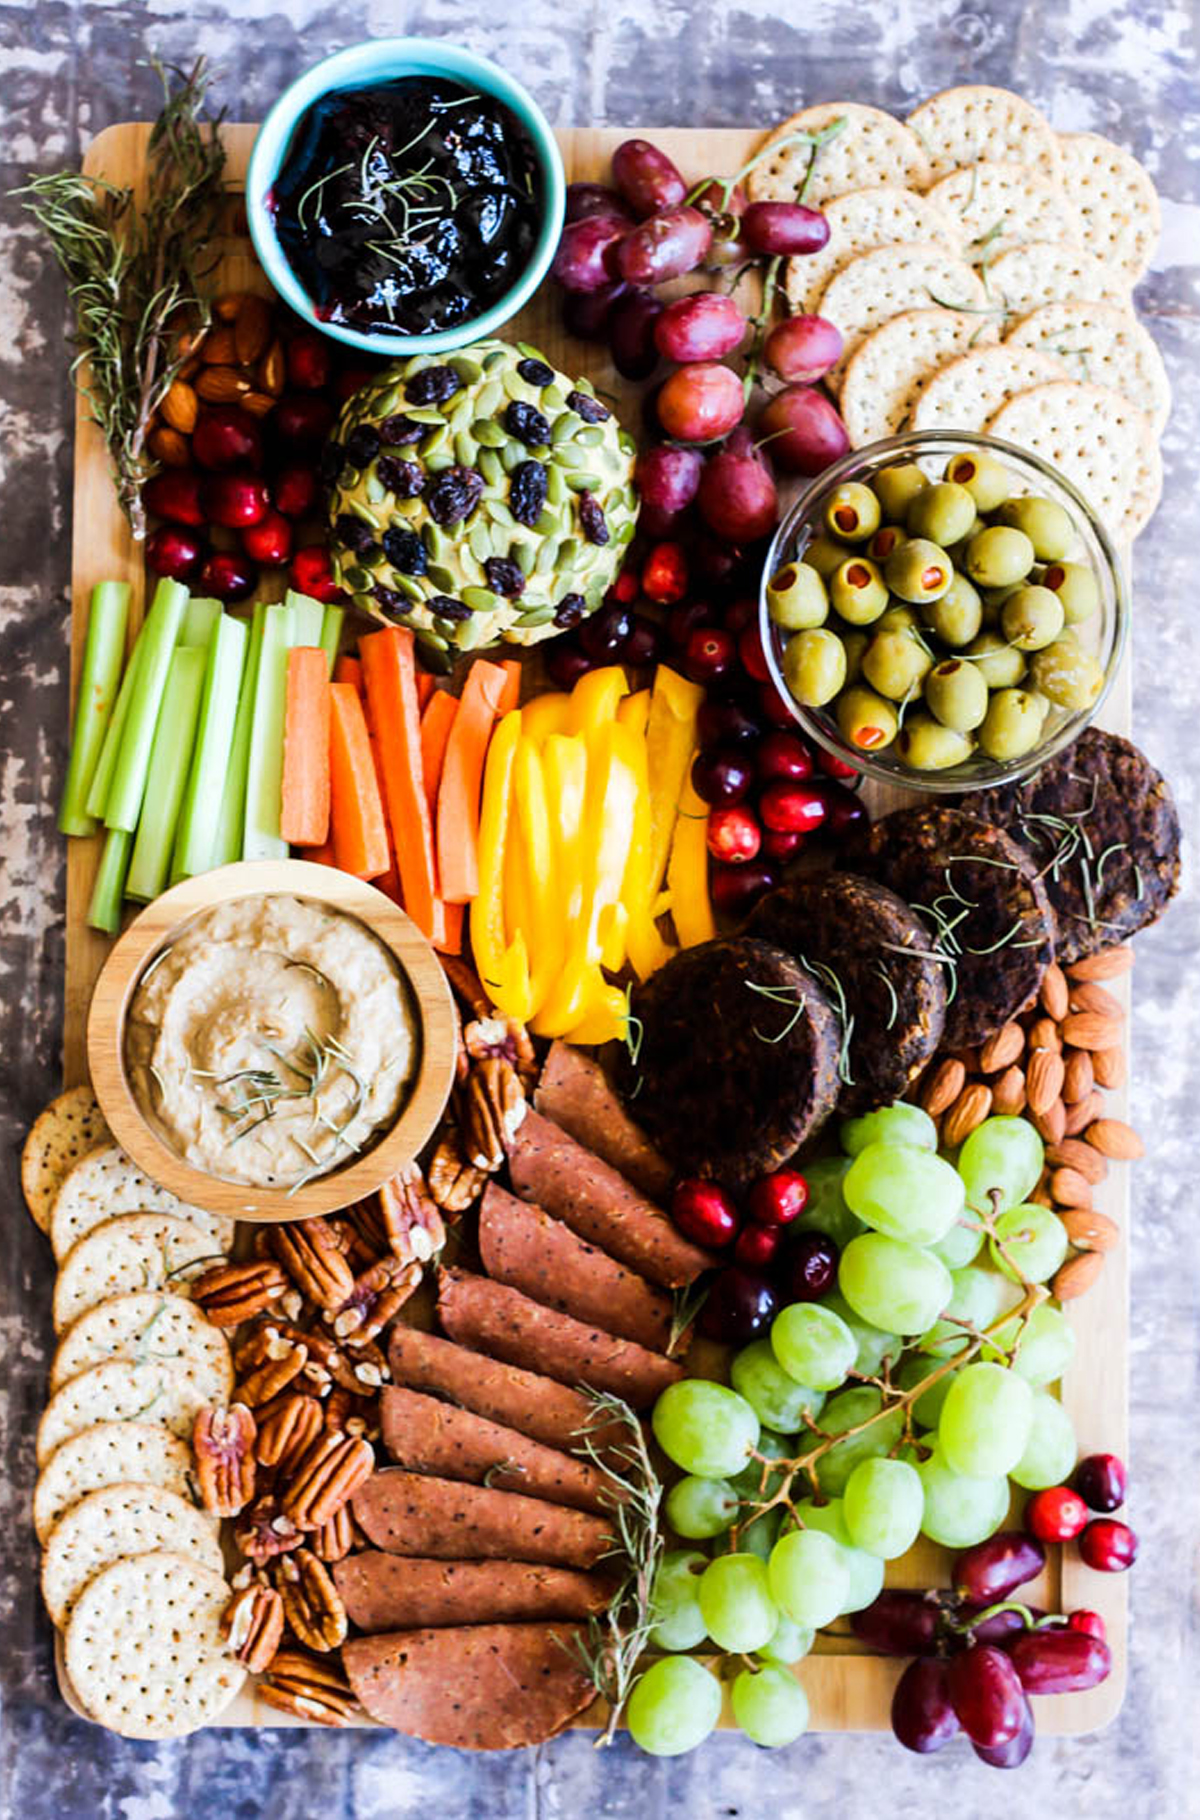 Jelly, grapes, nuts, crackers, celery, carrots, and olives are included on Emilie Eats charcuterie board.